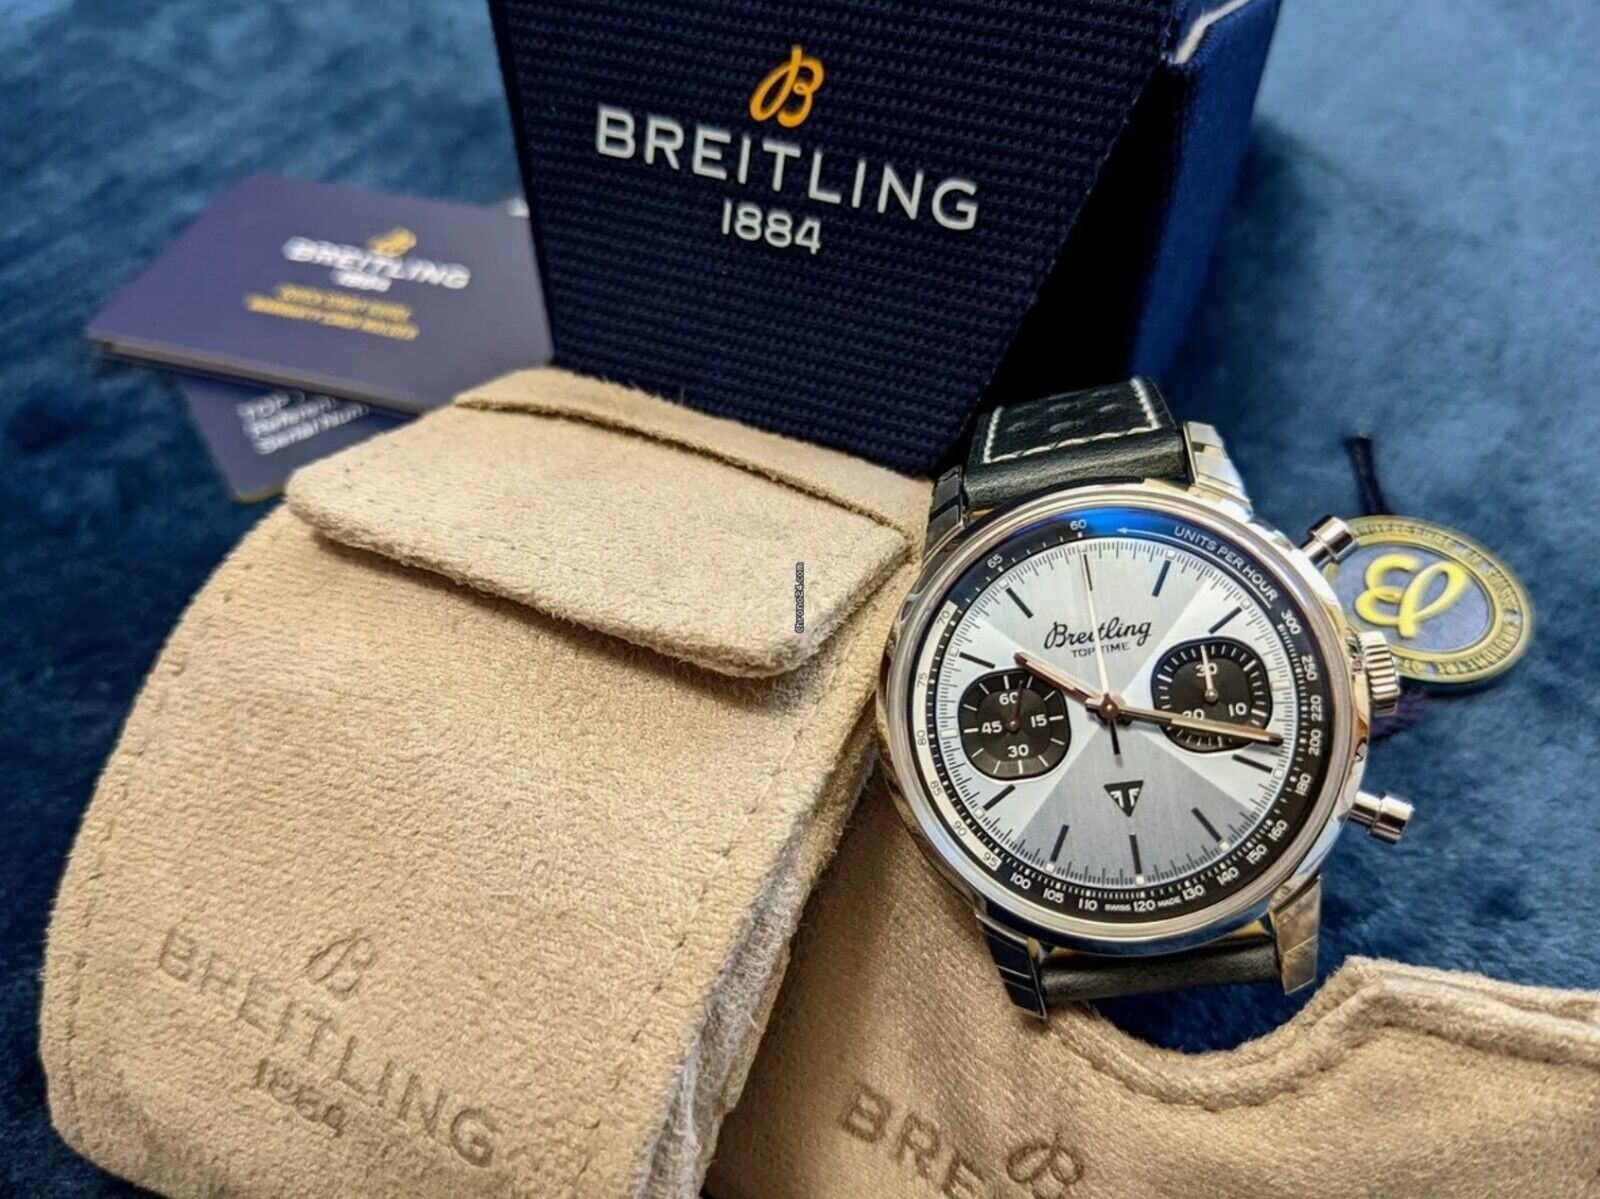 Breitling Top Time Triumph A23311 A23311121C1X1 Chronograph for